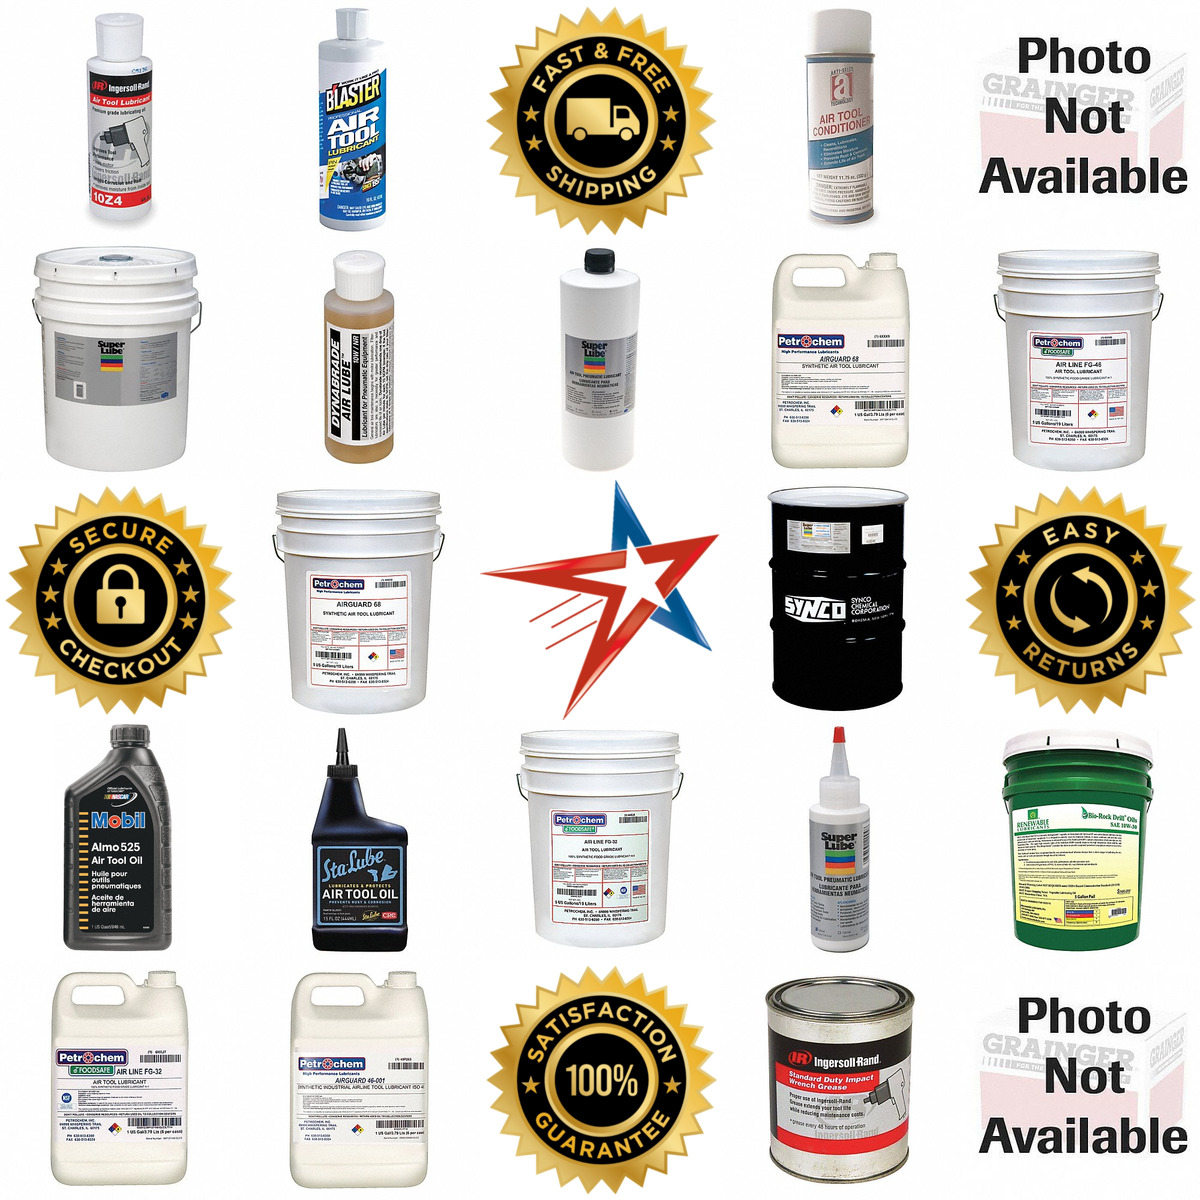 A selection of Air Tool Oil products on GoVets